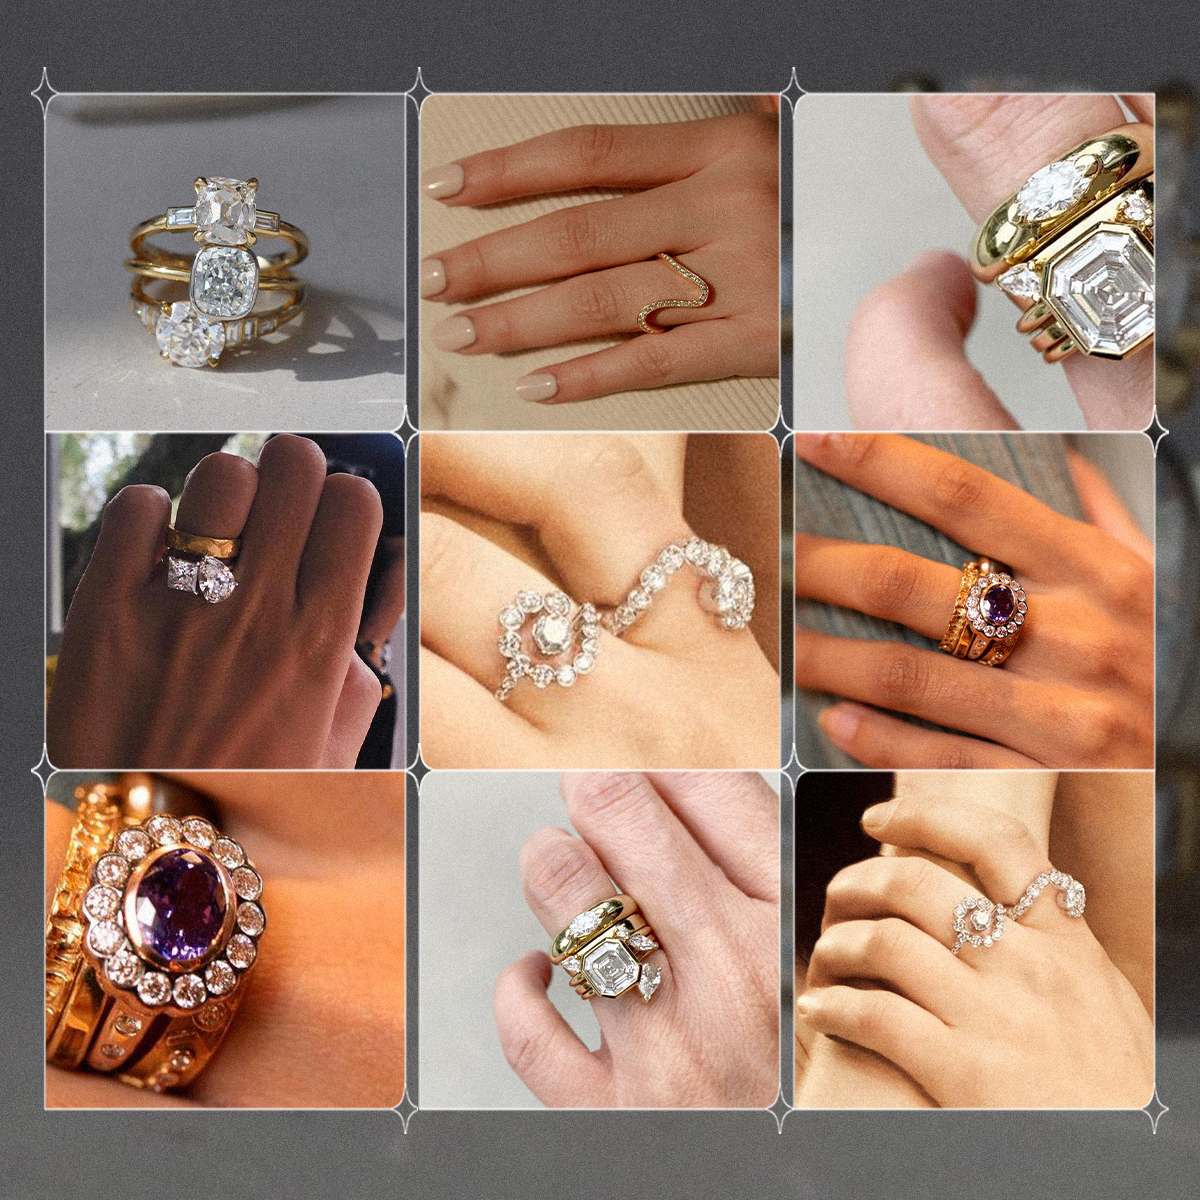 New engagement ring trends